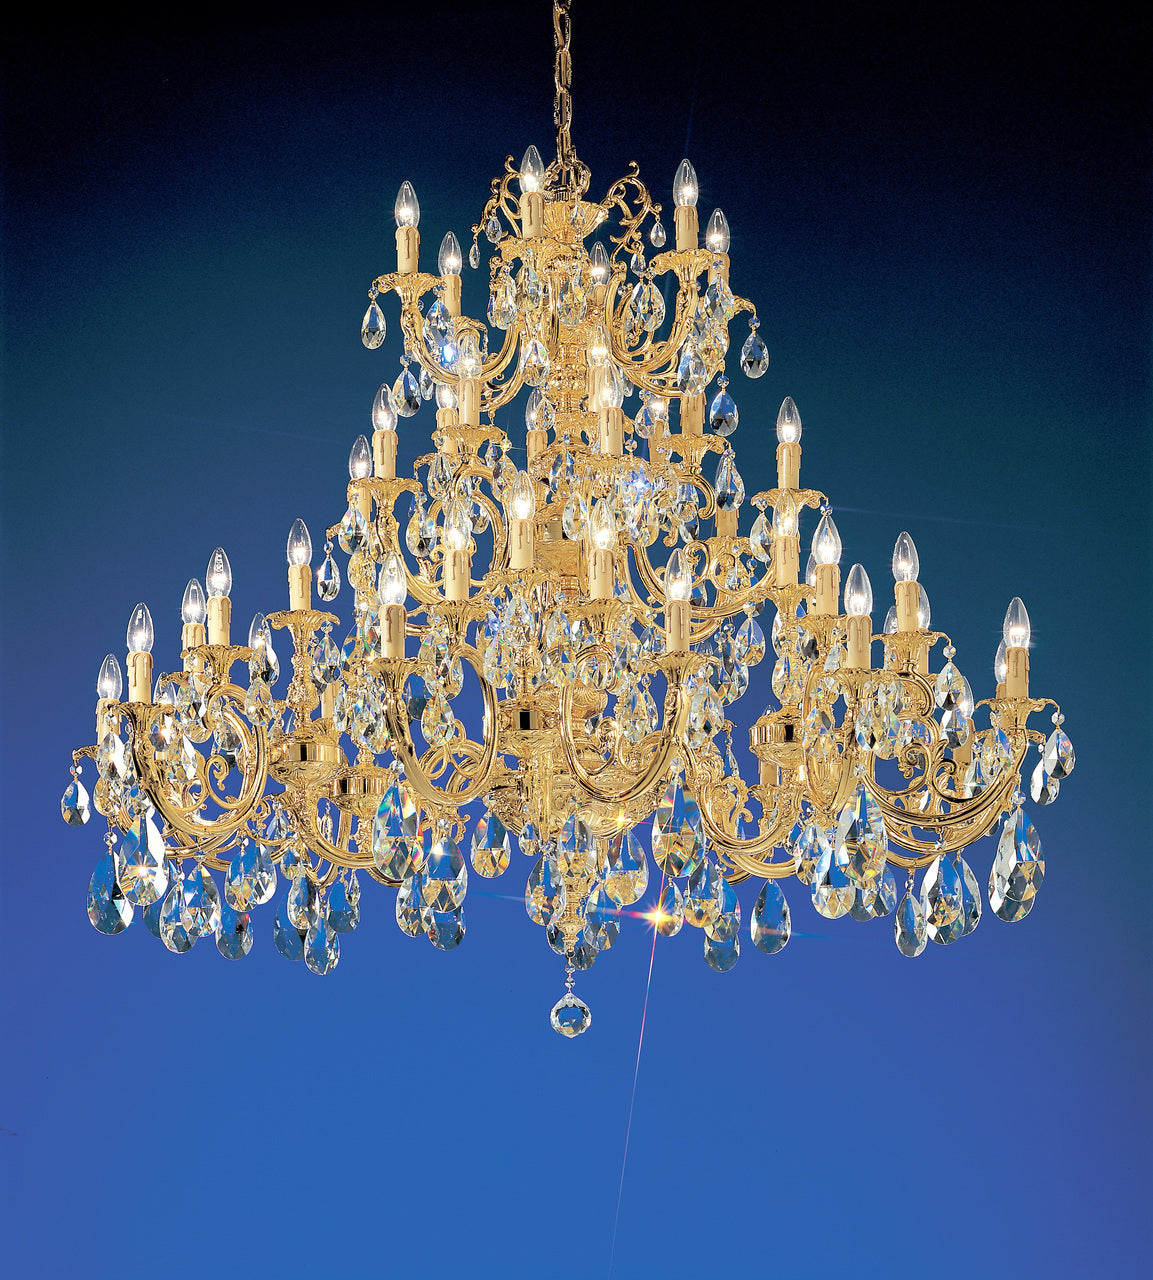 Classic Lighting 5748 G C Princeton Crystal/Cast Brass Chandelier in 24k Gold (Imported from Spain)